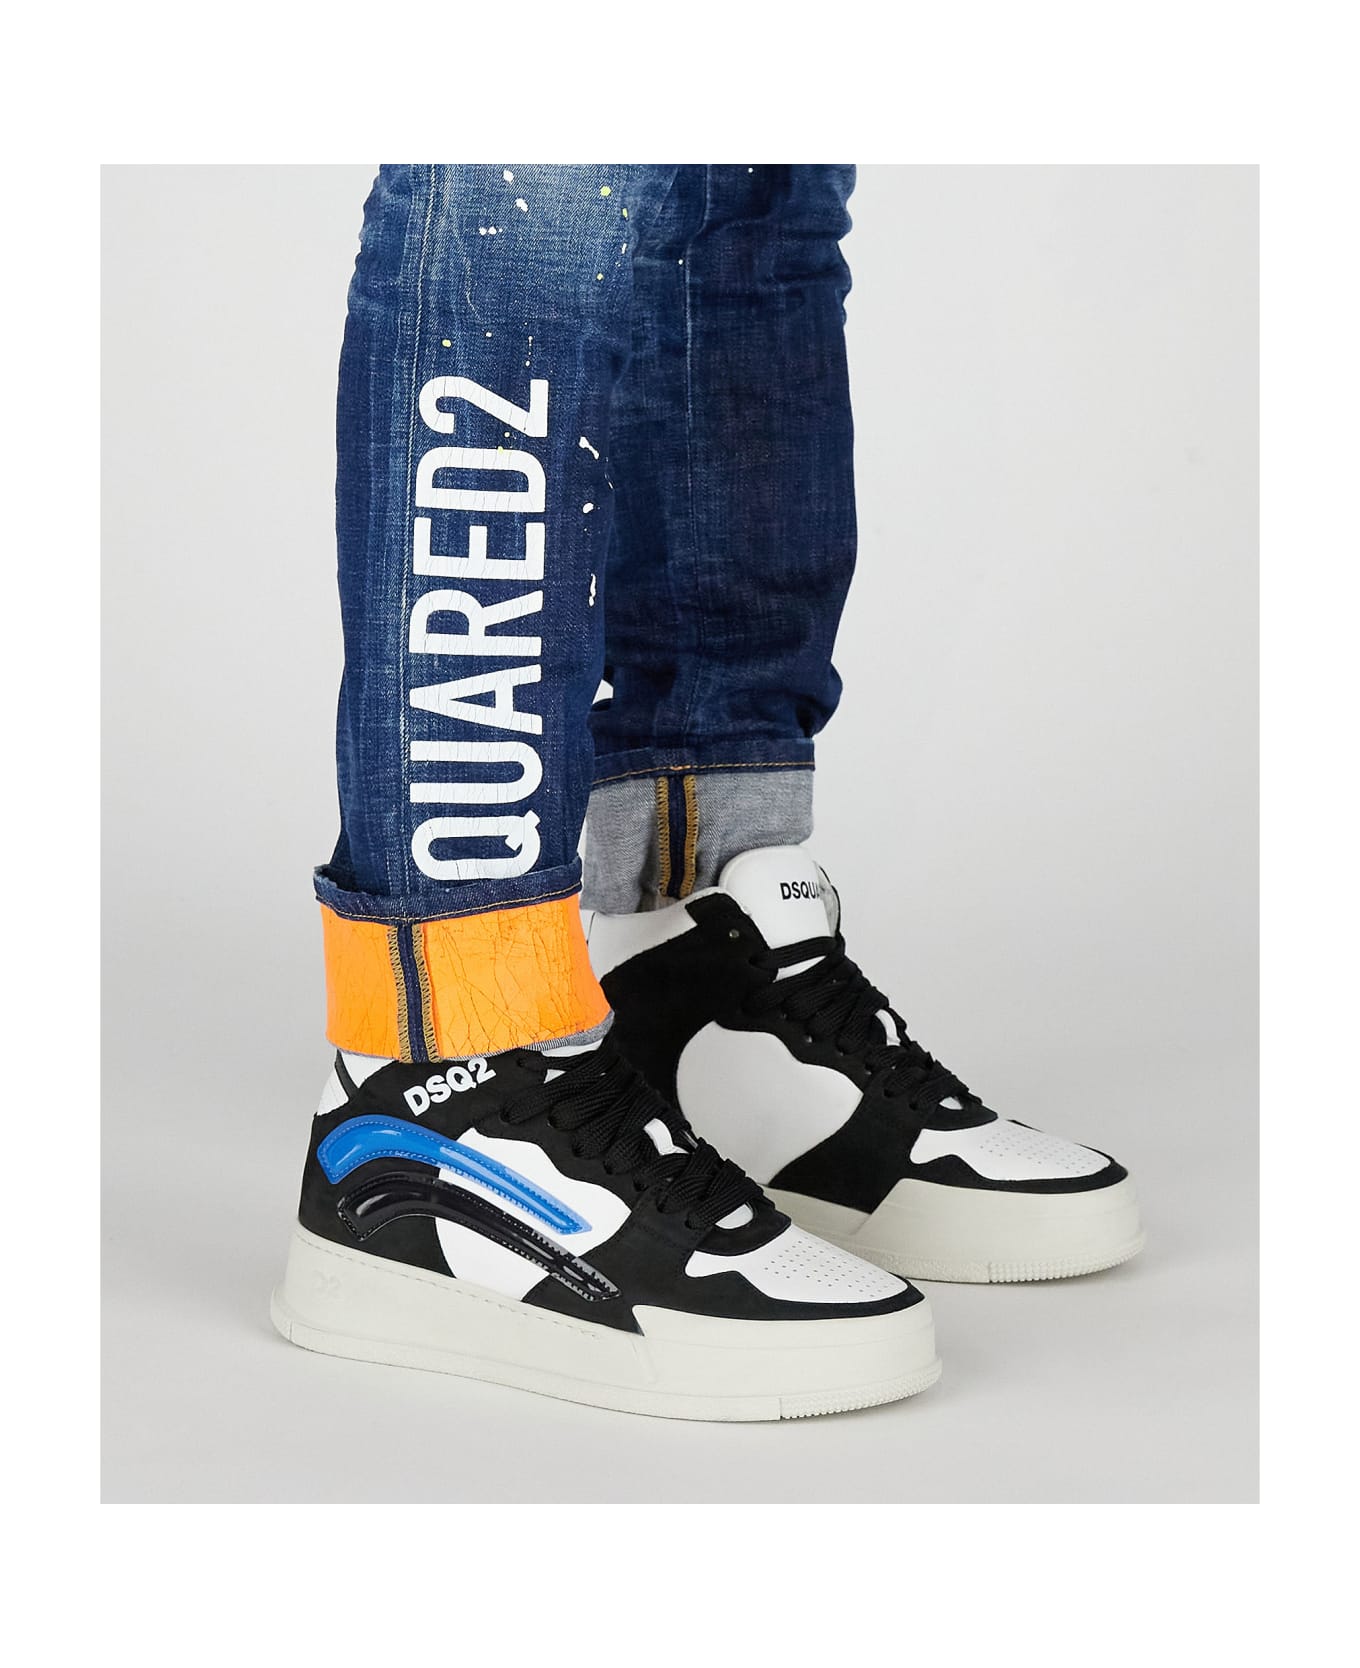 Dsquared2 Cool Guy Denim Jeans - Blue navy ボトムス